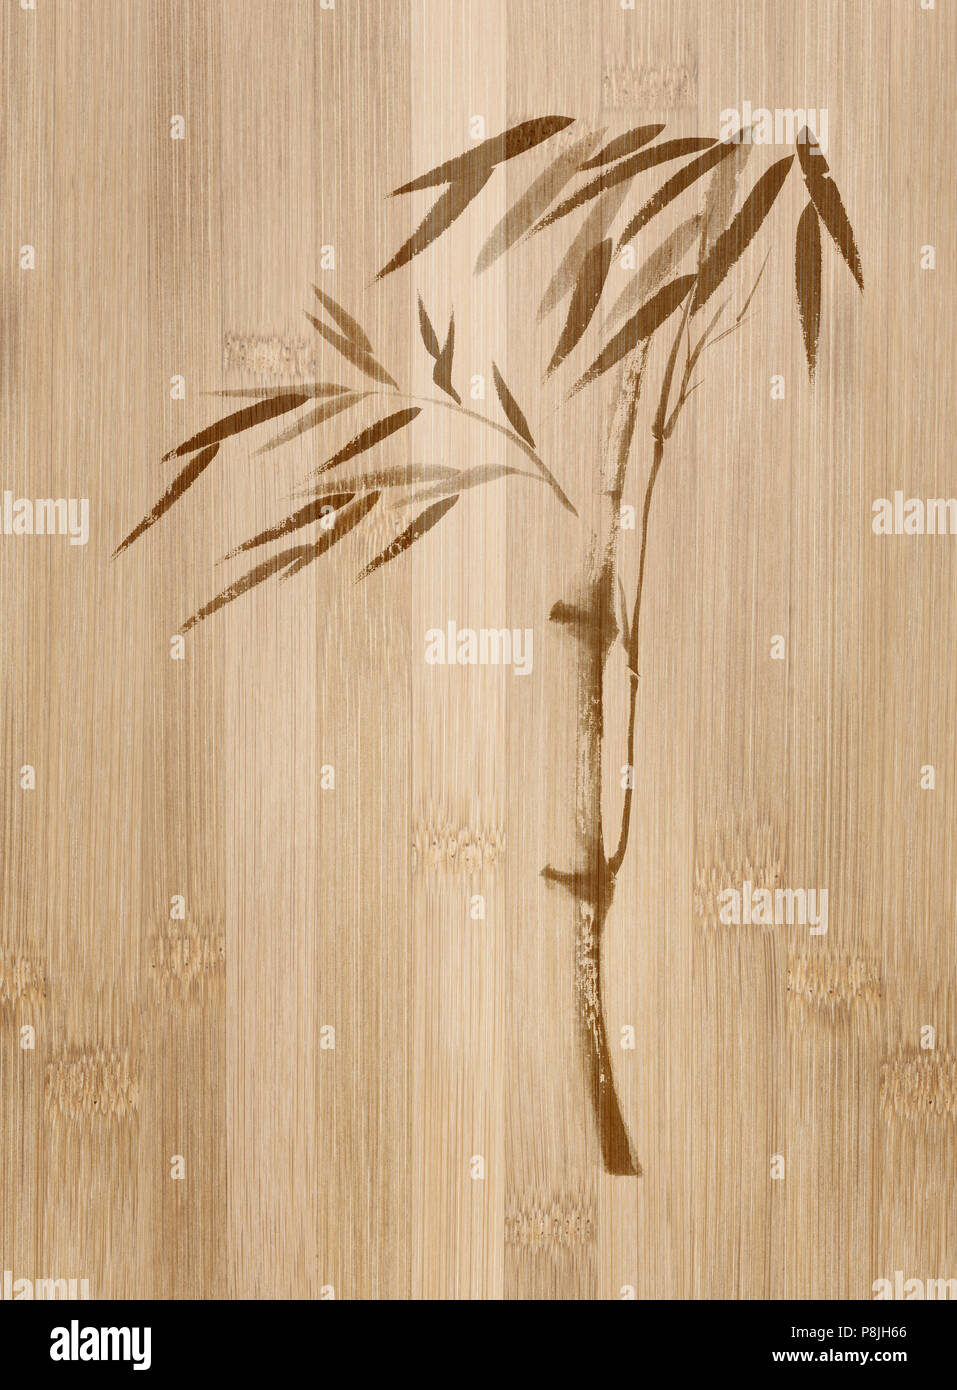 Oriental Zen style illustration of a bamboo stalk with leaves, Japanese Sumi-e ink artwork on natural bamboo wooden background Stock Photo